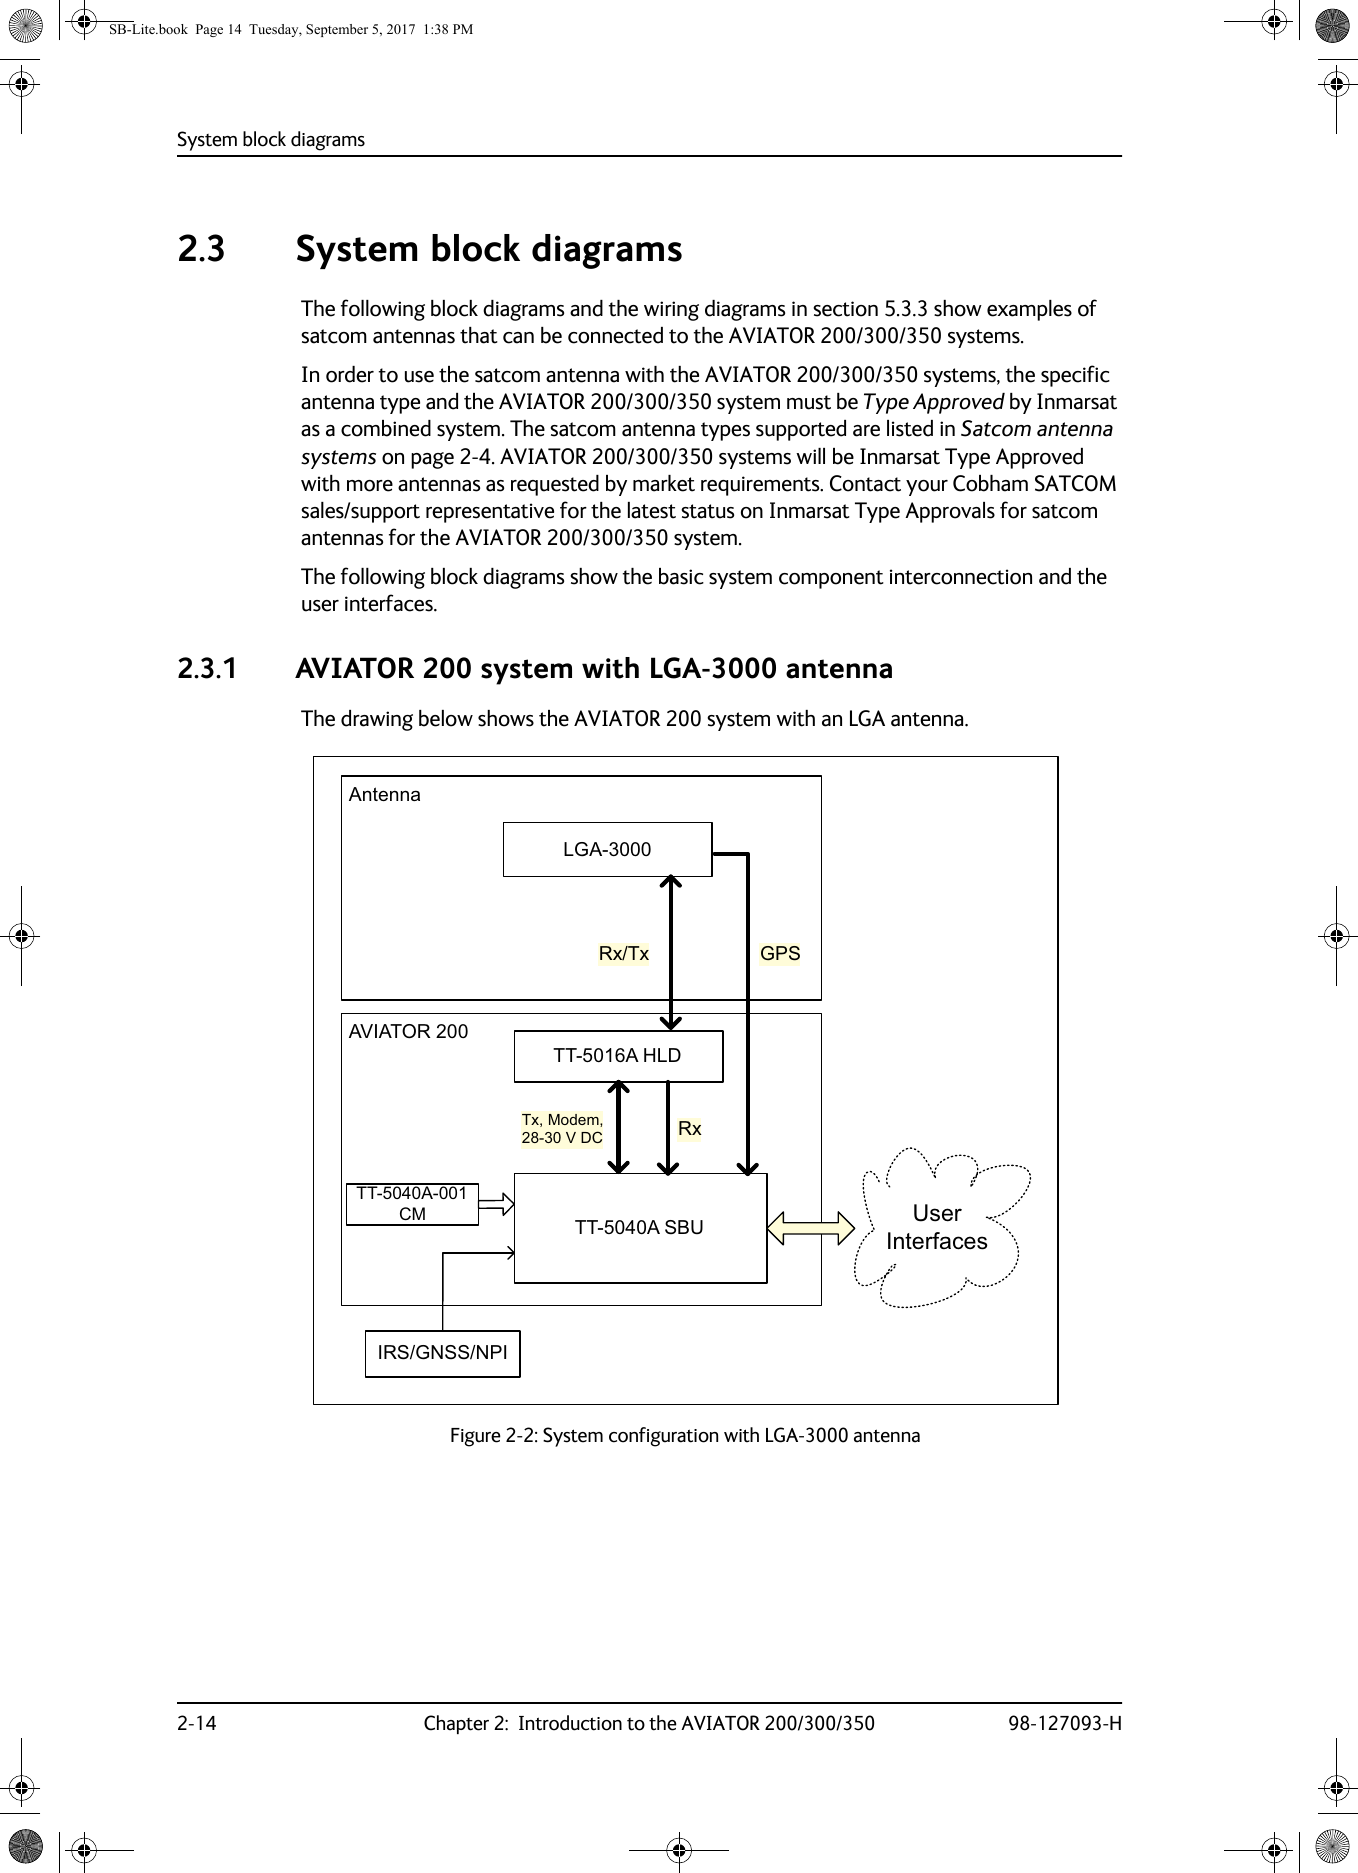 System block diagrams2-14 Chapter 2:  Introduction to the AVIATOR 200/300/350 98-127093-H2.3 System block diagramsThe following block diagrams and the wiring diagrams in section 5.3.3 show examples of satcom antennas that can be connected to the AVIATOR  200/300/350 systems.In order to use the satcom antenna with the AVIATOR  200/300/350 systems, the specific antenna type and the AVIATOR 200/300/350 system must be Type Approved by Inmarsat as a combined system. The satcom antenna types supported are listed in Satcom antenna systems on page  2-4. AVIATOR  200/300/350 systems will be Inmarsat Type Approved with more antennas as requested by market requirements. Contact your Cobham SATCOM sales/support representative for the latest status on Inmarsat Type Approvals for satcom antennas for the AVIATOR  200/300/350 system. The following block diagrams show the basic system component interconnection and the user interfaces.2.3.1 AVIATOR 200 system with LGA-3000 antennaThe drawing below shows the AVIATOR 200 system with an LGA antenna.Figure 2-2:  System configuration with LGA-3000 antenna/*$77$+/&apos;$QWHQQD77$6%8,56*16613,$9,$72577$&amp;08VHU,QWHUIDFHV5[5[7[7[0RGHP9&apos;&amp;*36SB-Lite.book  Page 14  Tuesday, September 5, 2017  1:38 PM